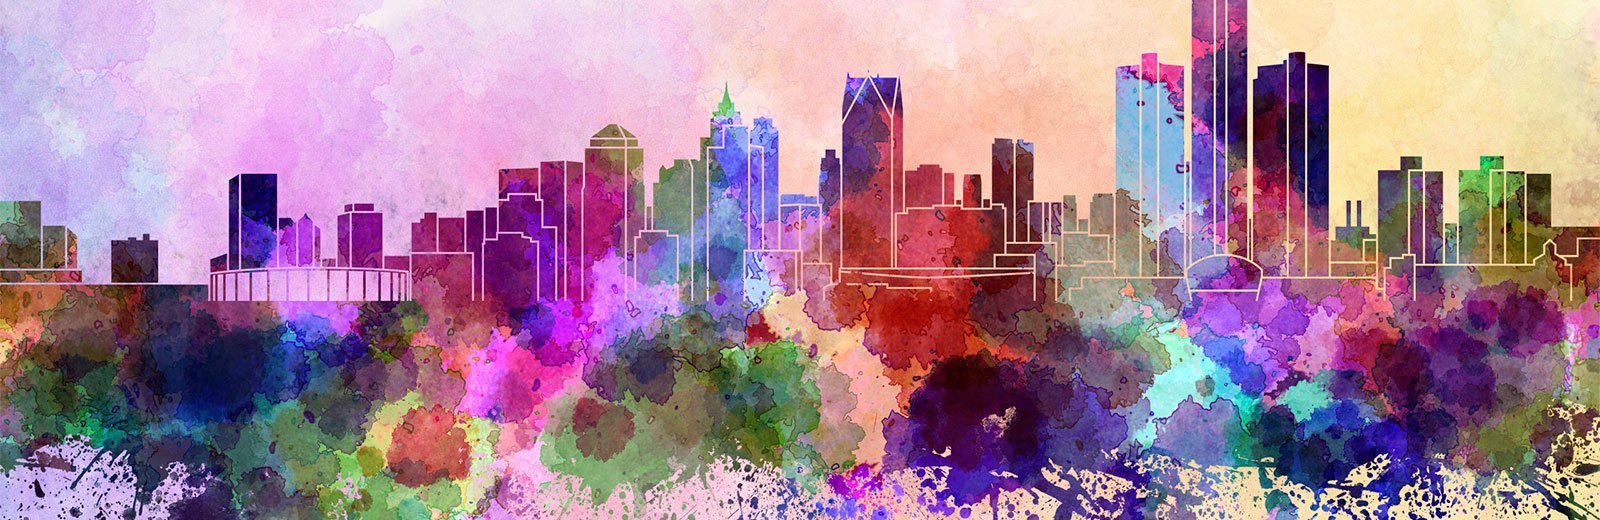 Illustrated city skyline in rainbow colors.